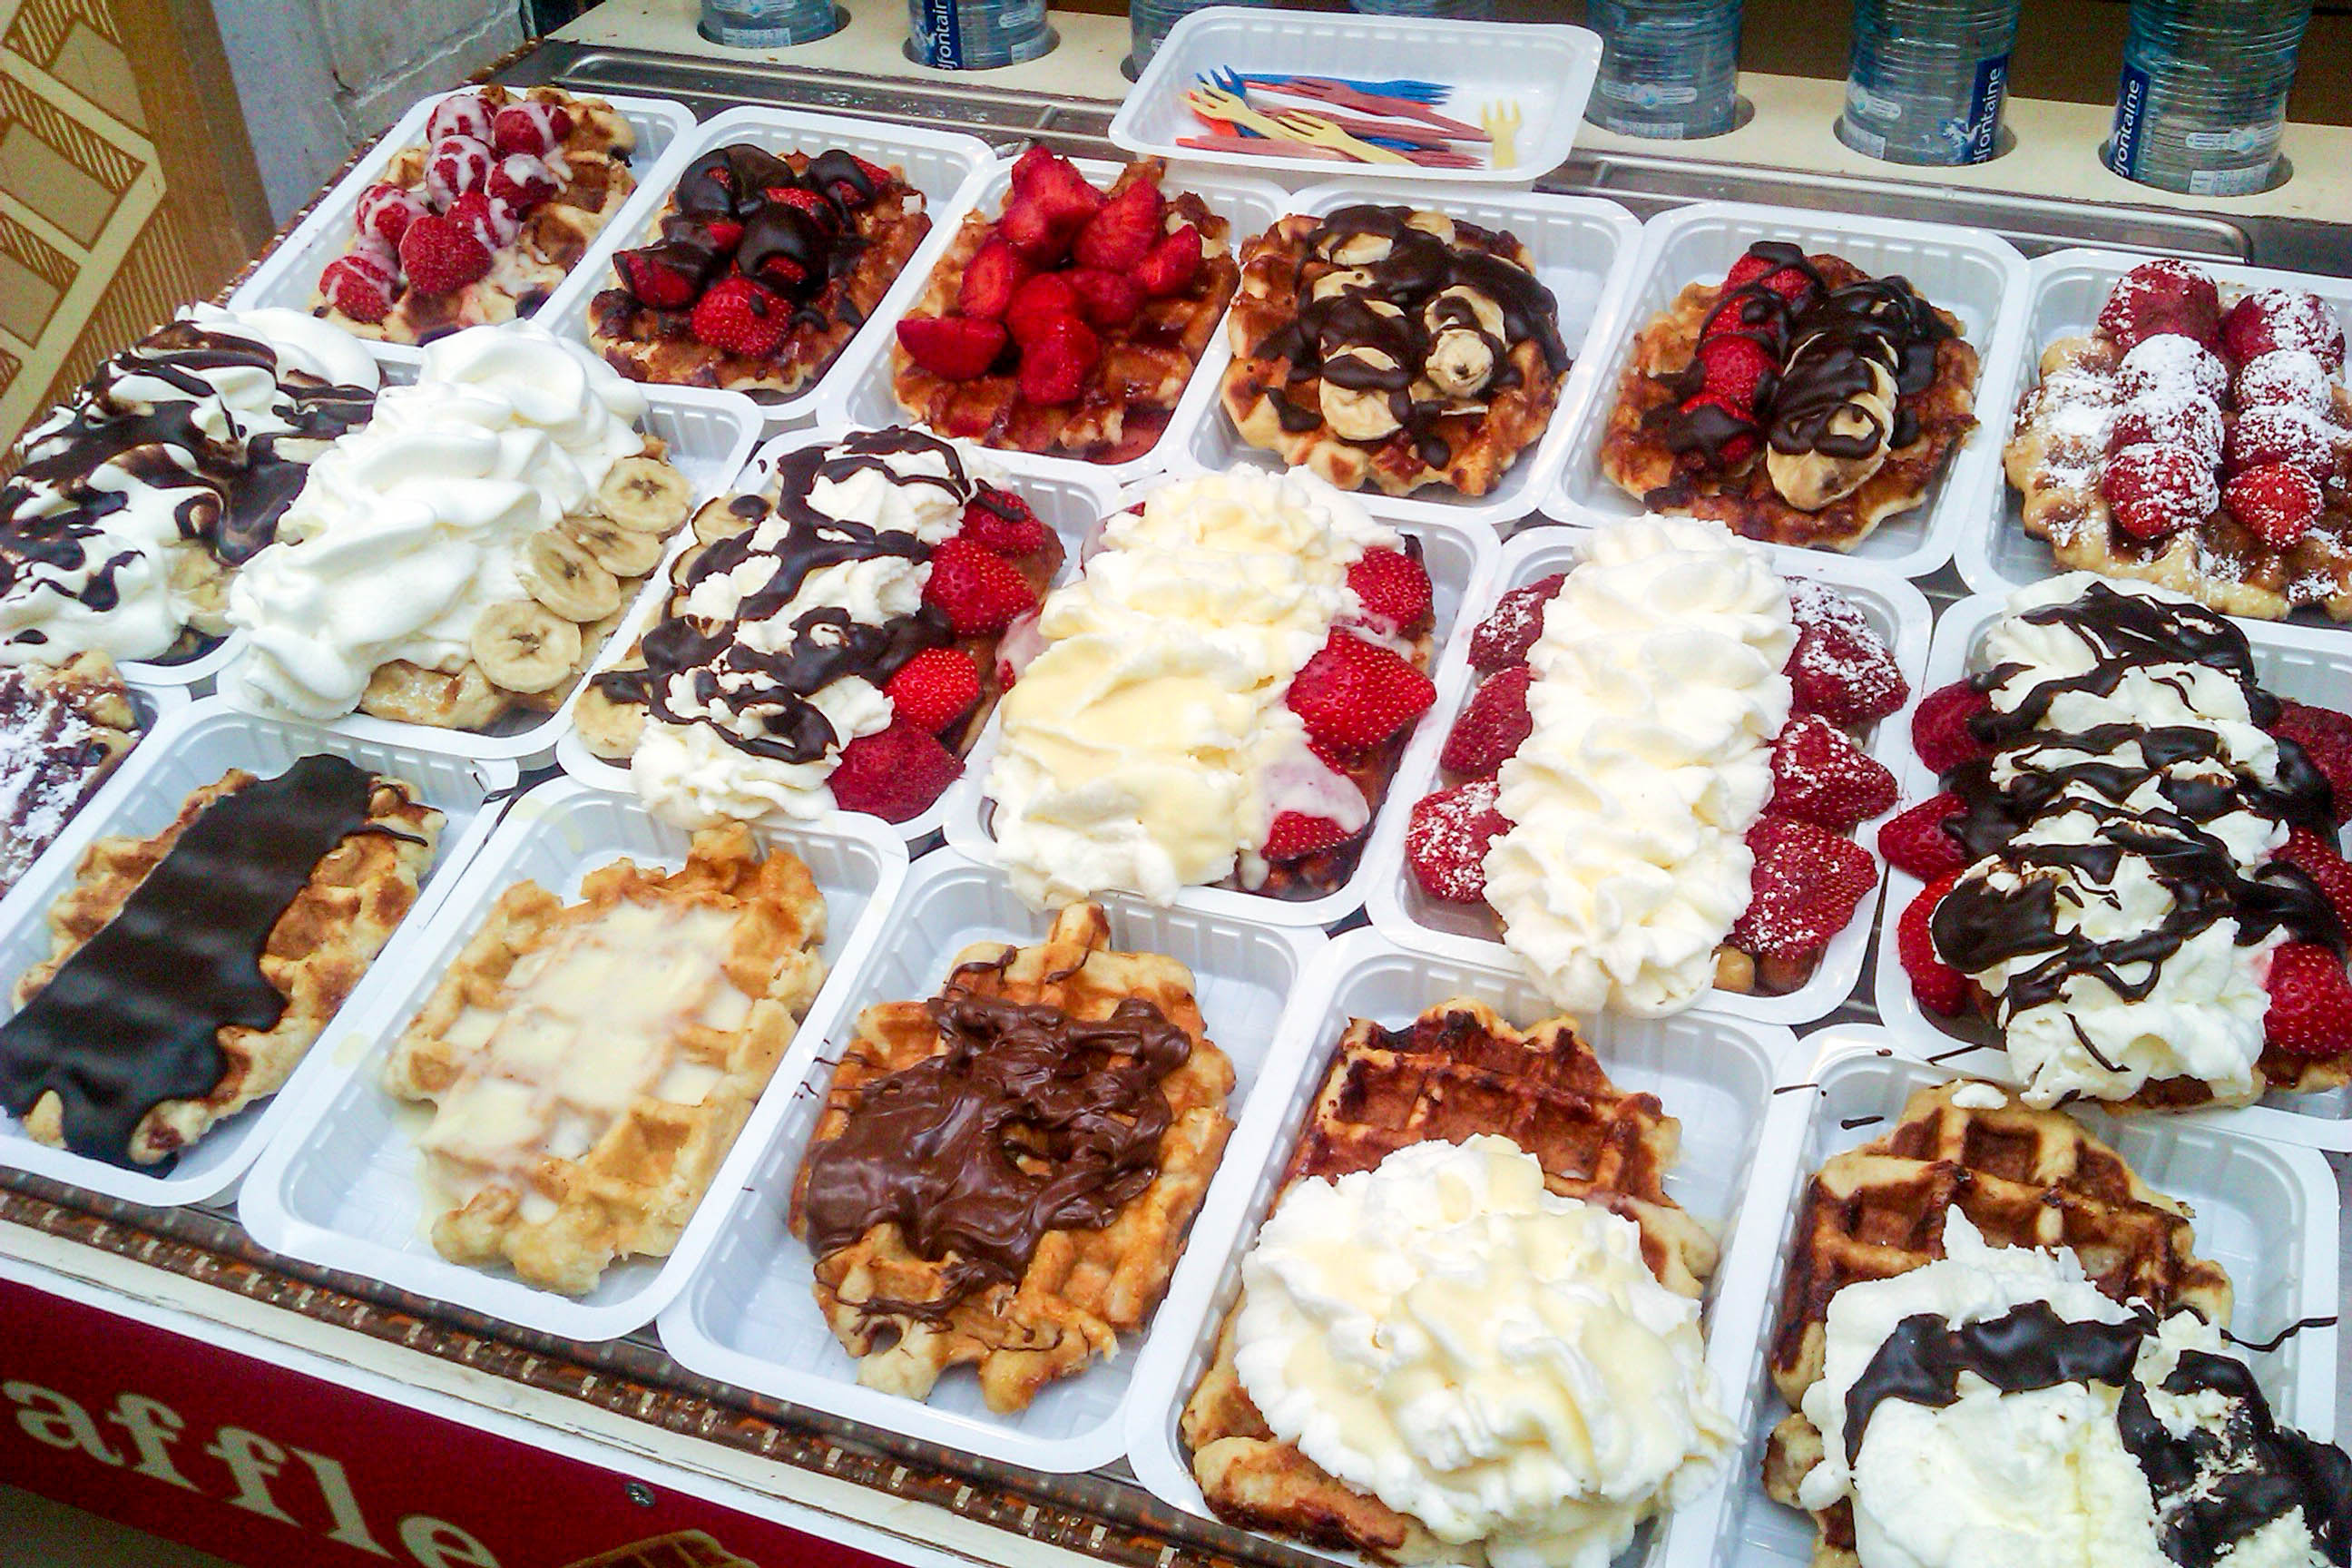 Where to Find Belgian Waffles- In Brussels - Bold Tourist